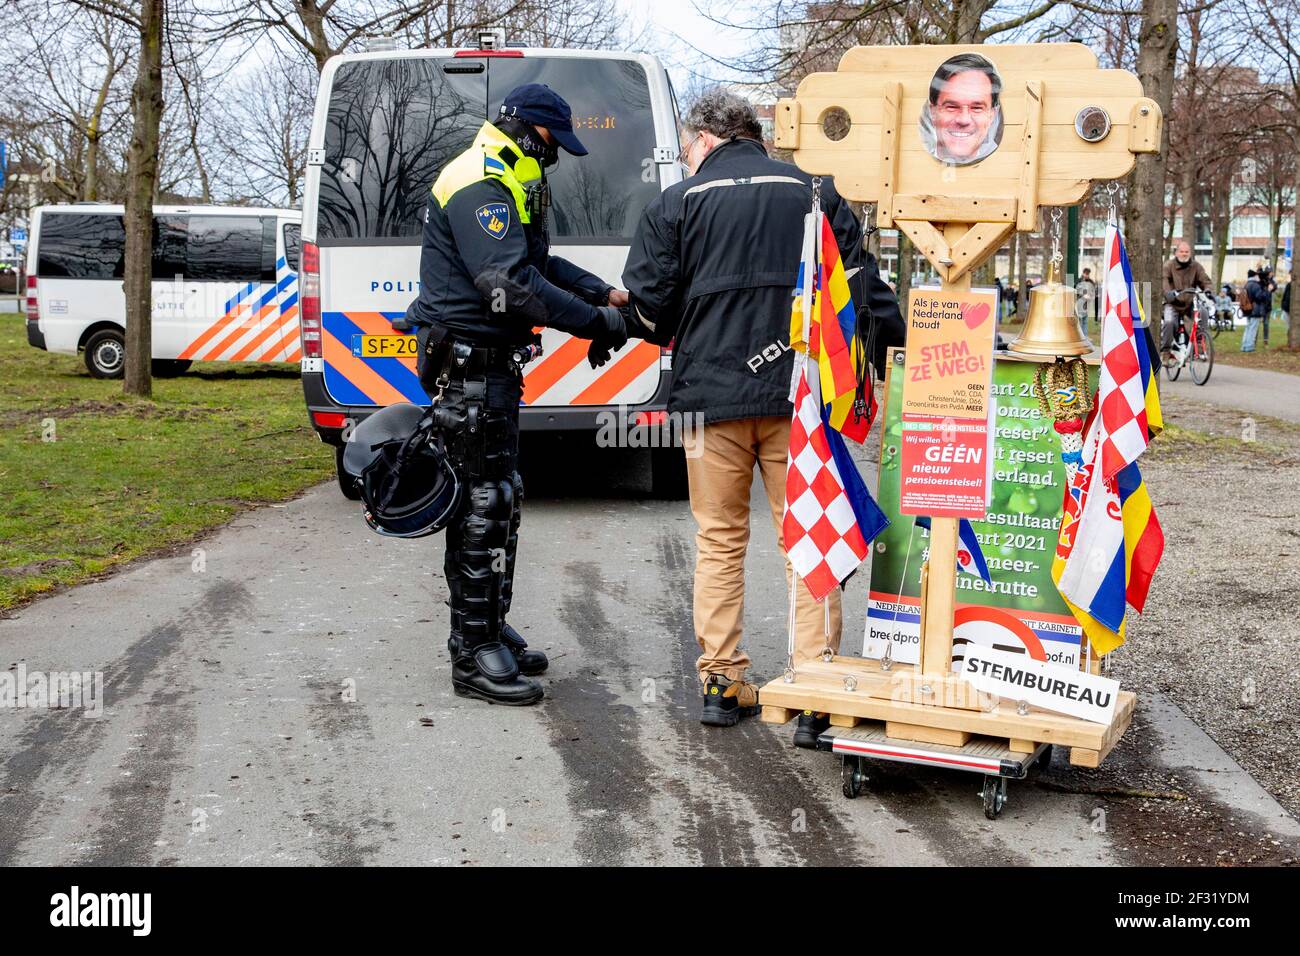 THE HAGUE, NETHERLANDS - MARCH 14: A protesters is checked by riot police during a protest on the Malieveld against the coronavirus policies and the government on March 14, 2021 in The Hague, Netherlands. The protest comes days ahead of the March 17 general elections. Only 200 people were allowed by local authorities to attend the protest, but instead several thousands showed up. (Photo by Niels Wenstedt/BSR Agency/Alamy Live News) Stock Photo